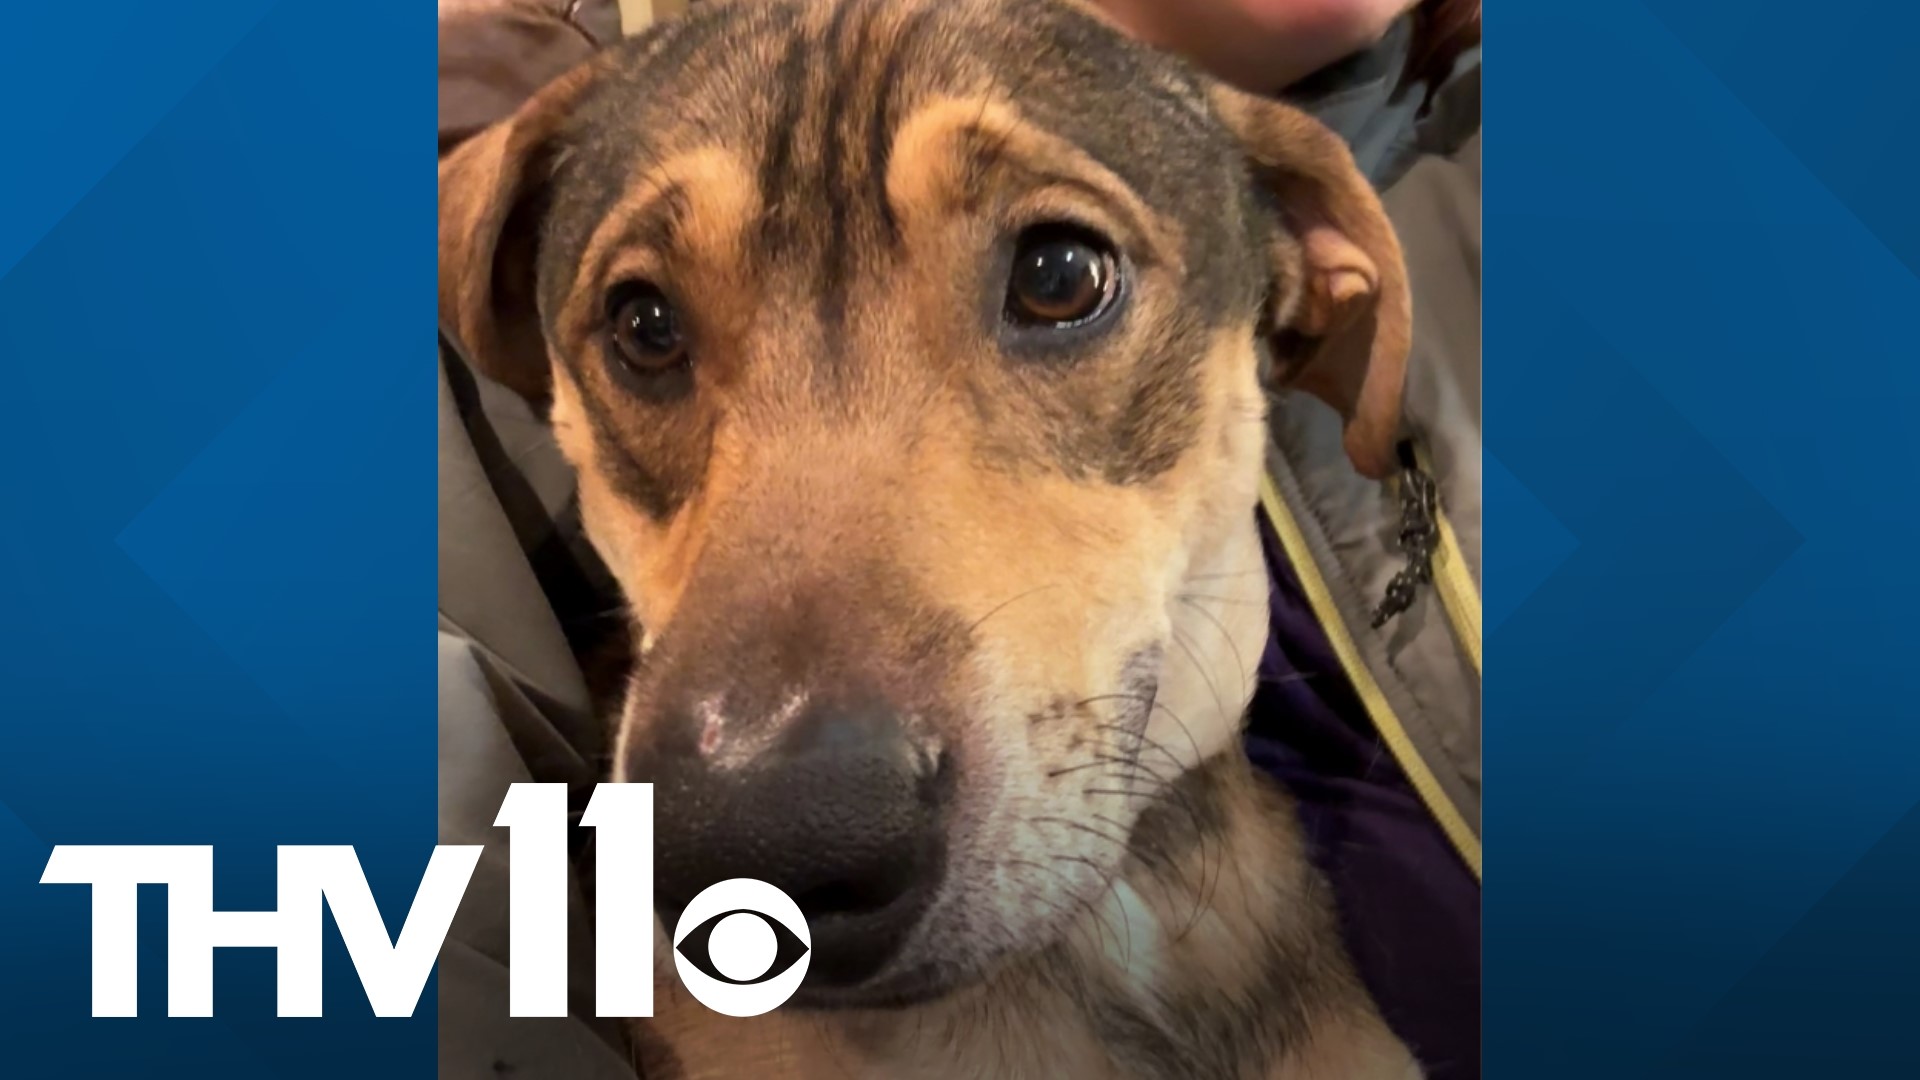 Meet Boscoe, a young pup who loves hugs & snuggles with his family. He's very well-mannered and great on a leash. Visit him at the Little Rock Animal Village today!